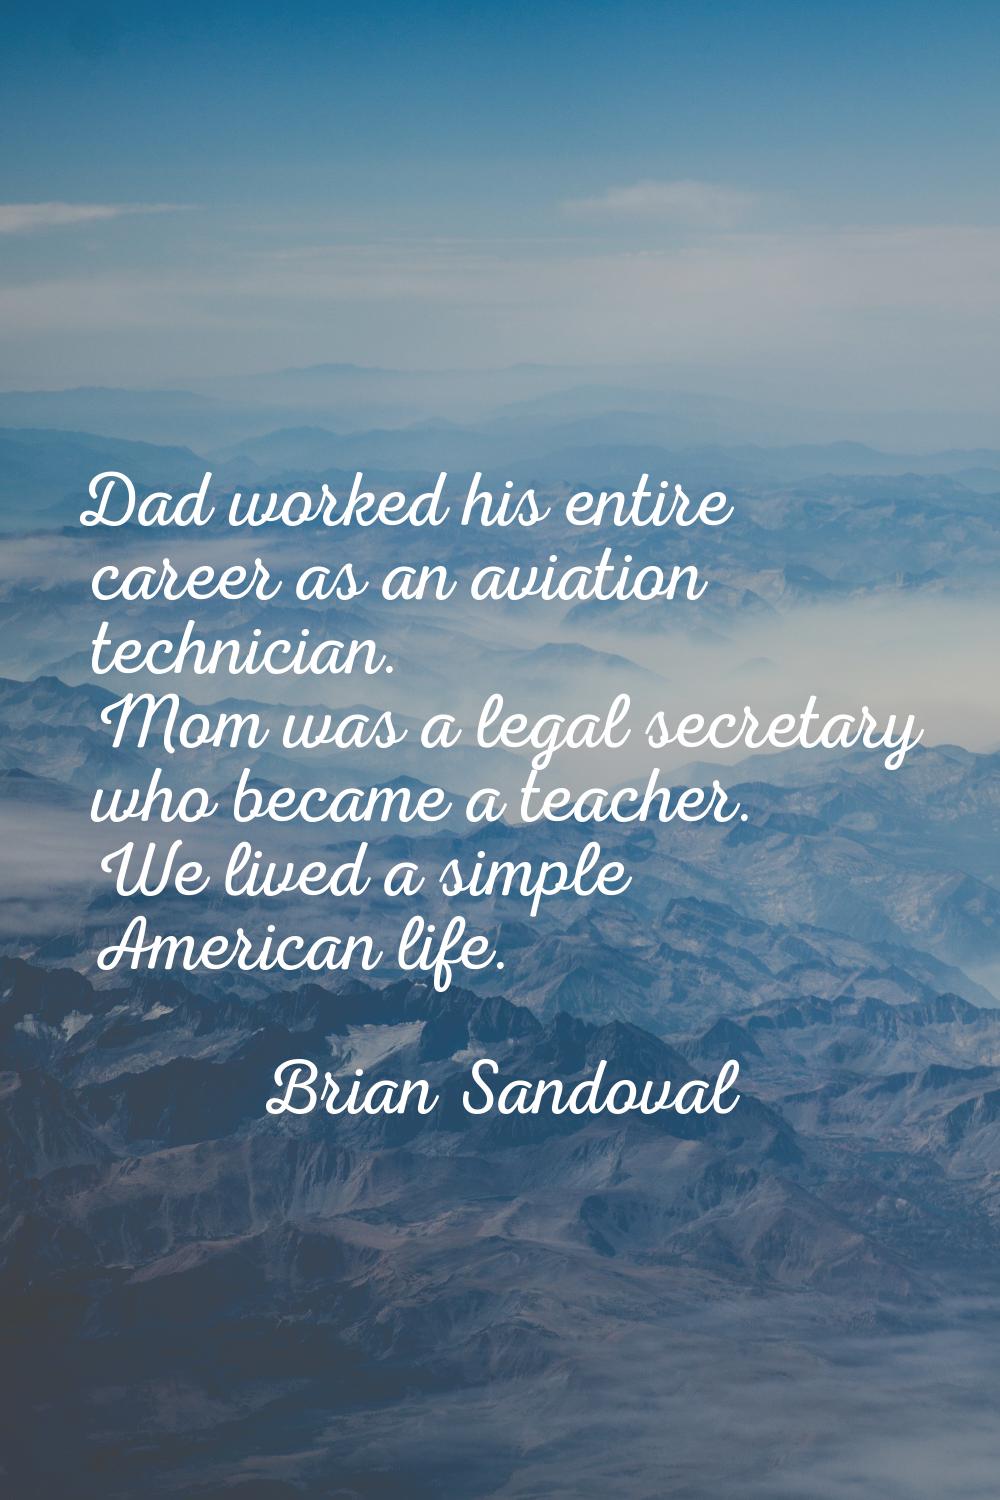 Dad worked his entire career as an aviation technician. Mom was a legal secretary who became a teac